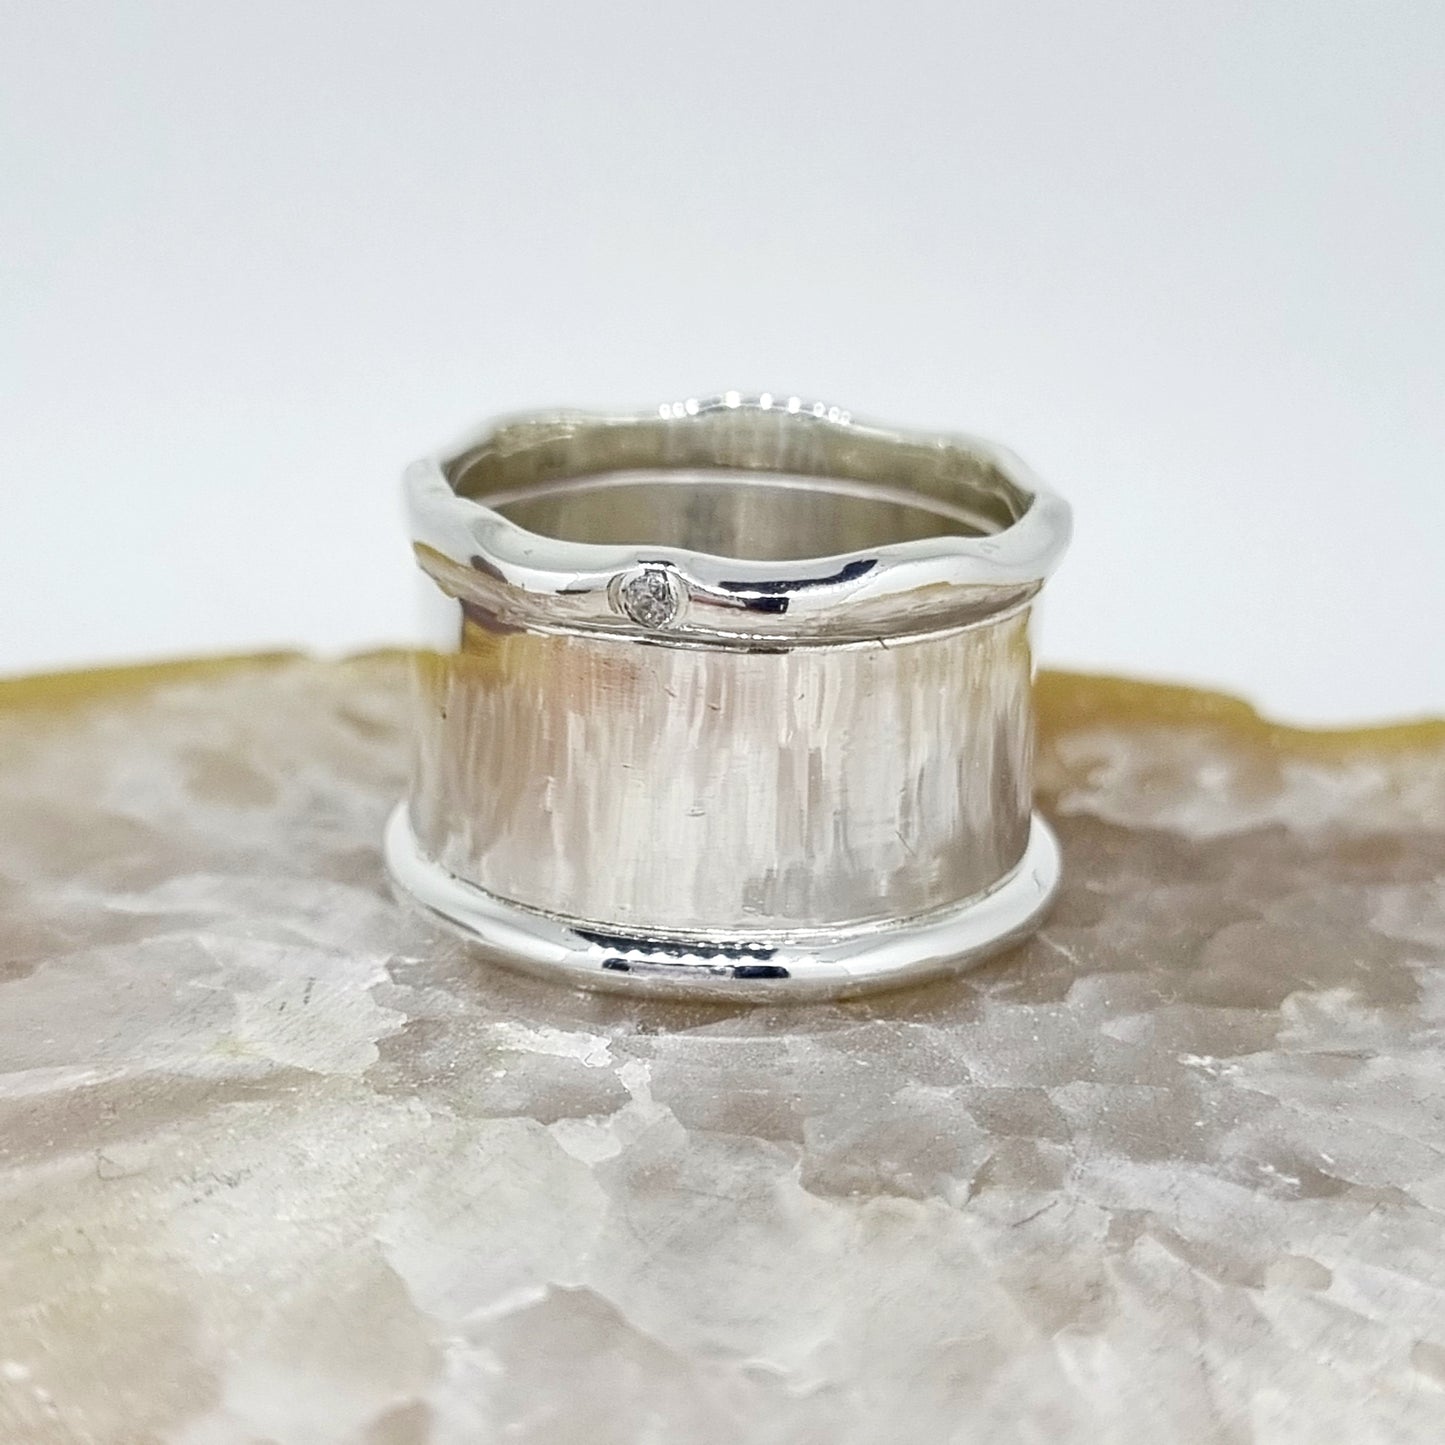 Silver Girl - If You Are A Silver Ring Lover This One Is A Must. She Has An Added Sparkle Too